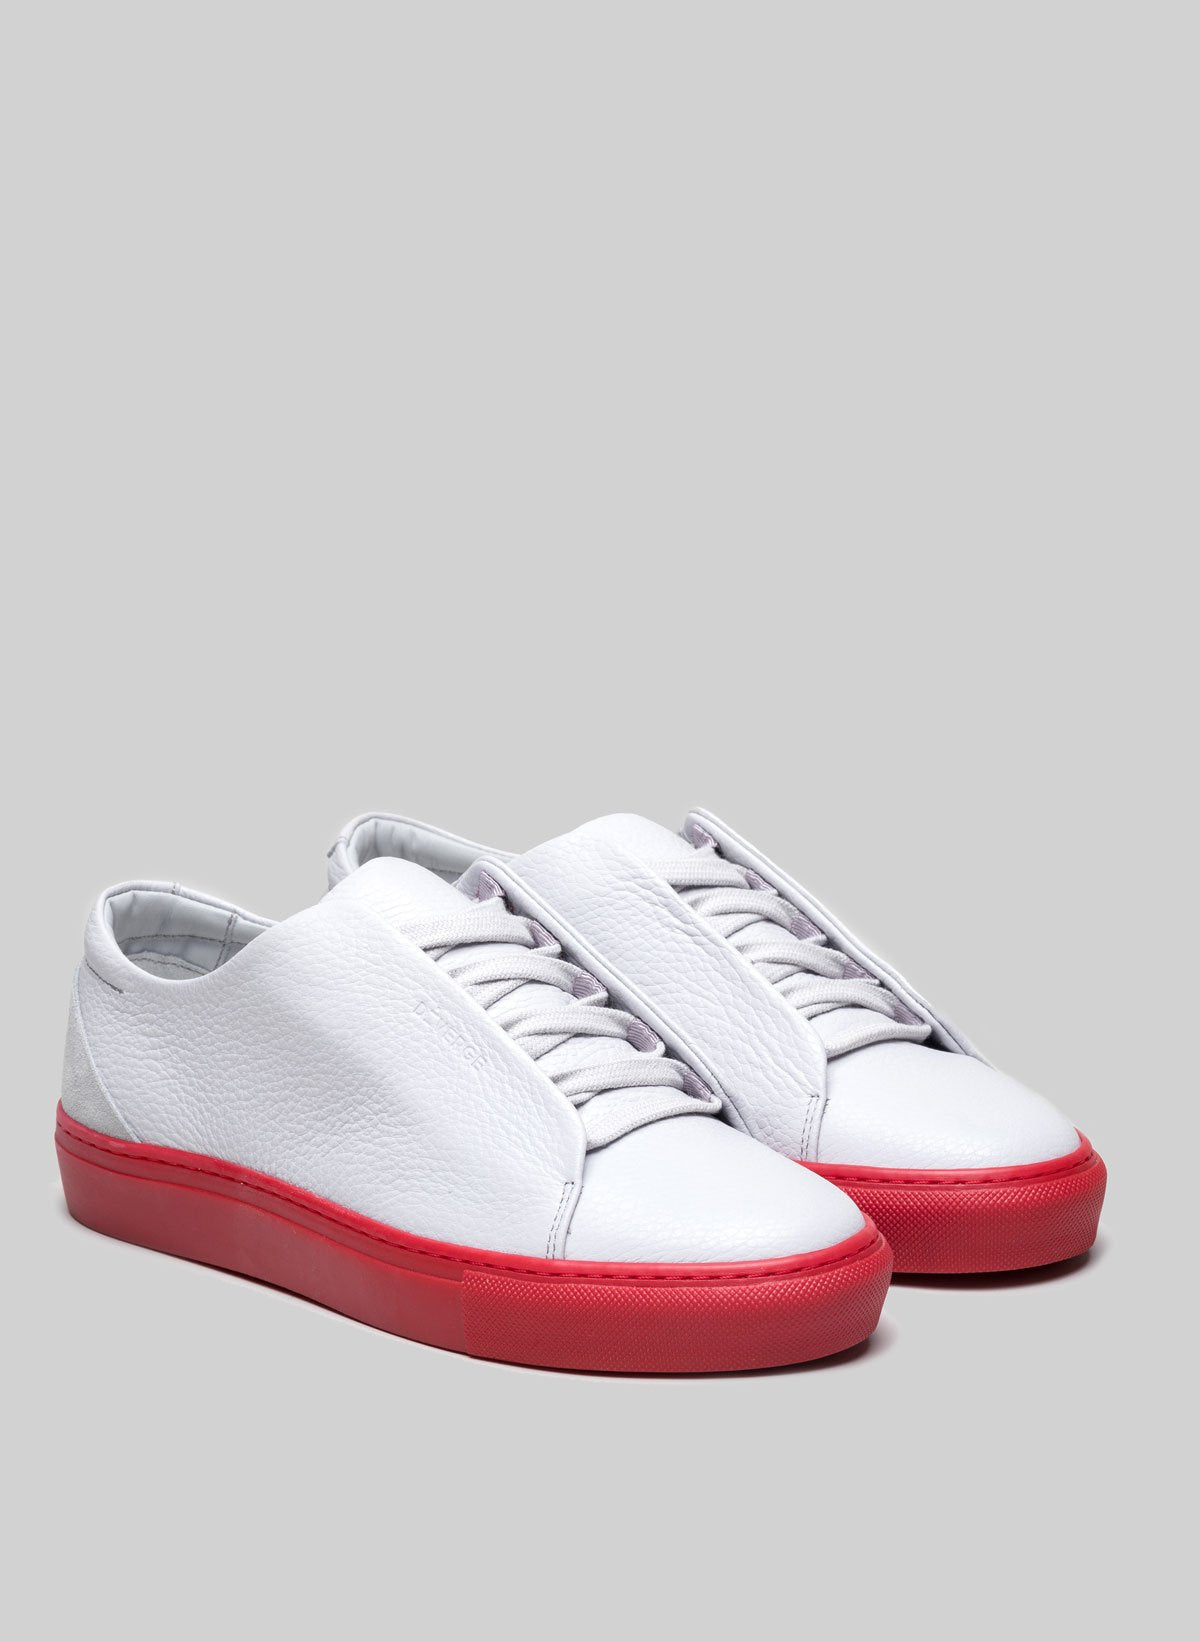 A pair of low top custom white sneakers with red soles by Diverge.